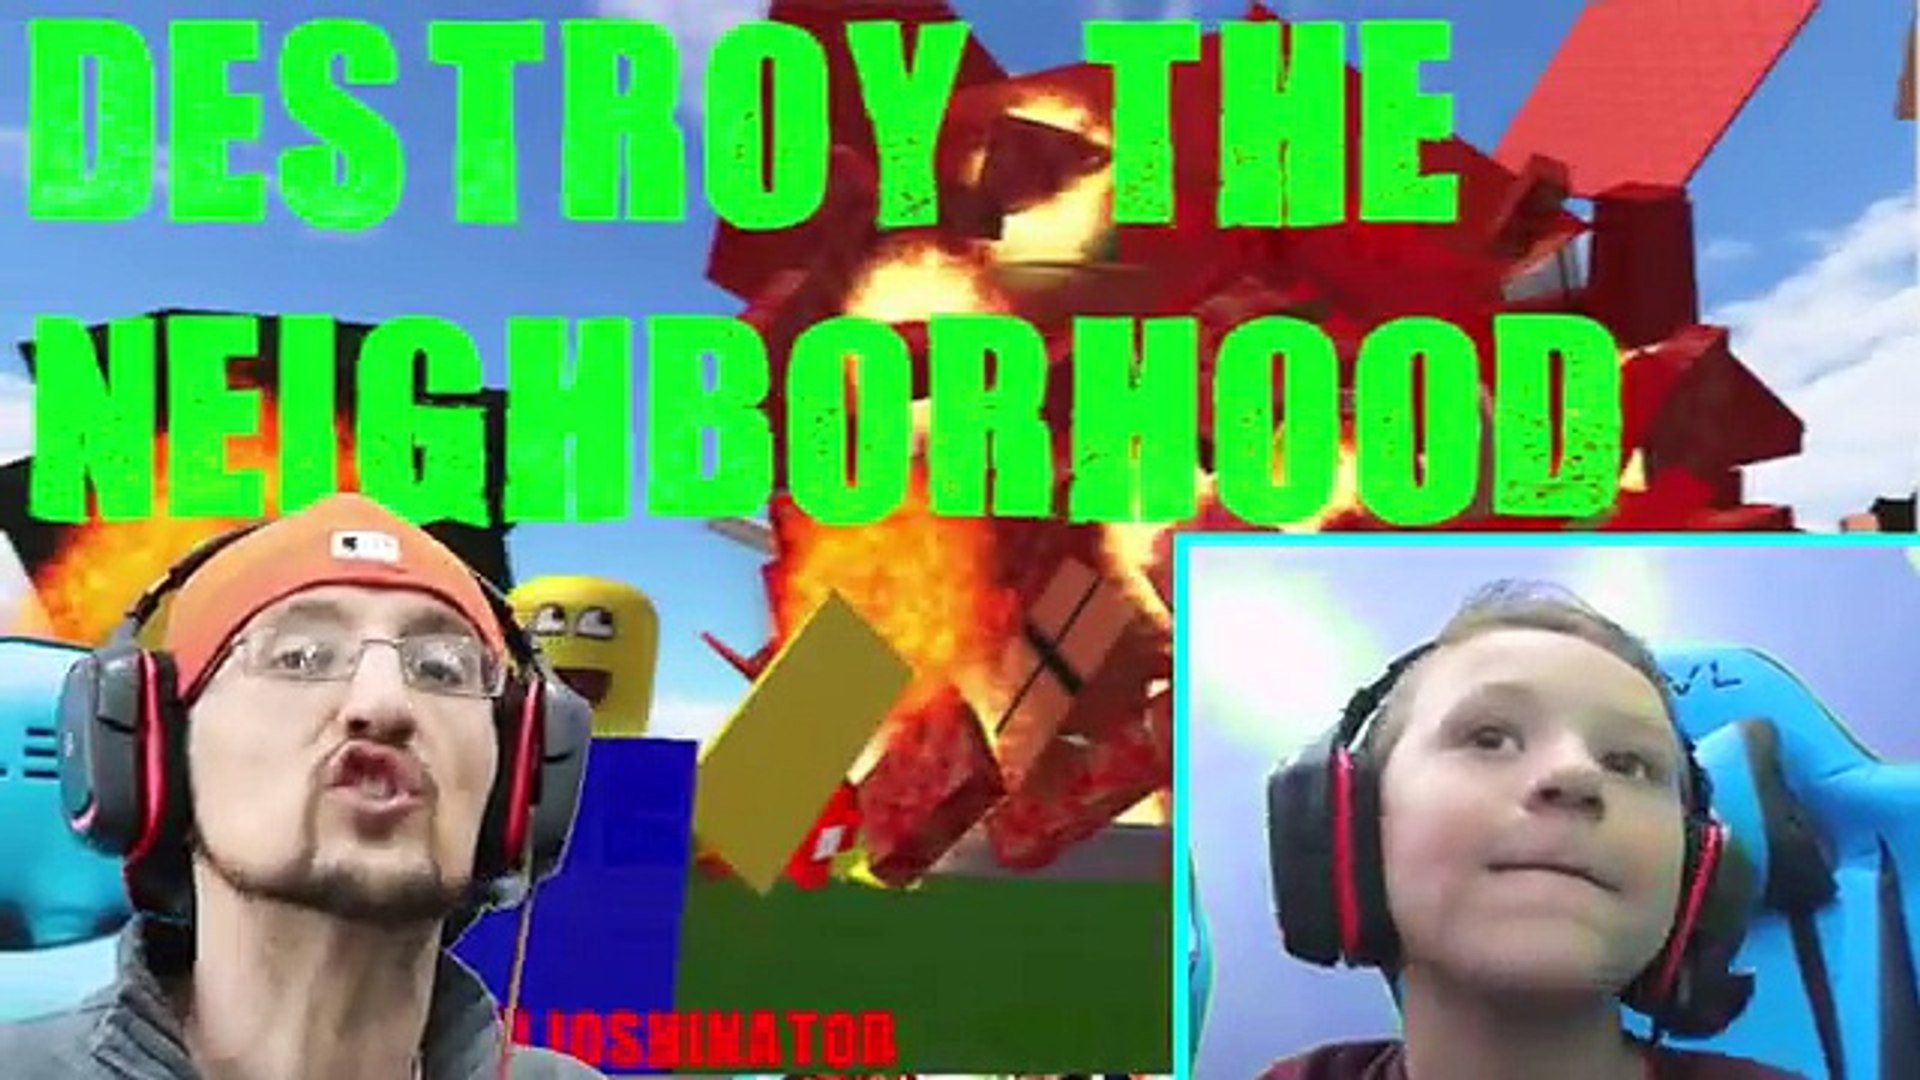 Roblox Destroy The Neighborhood W Airplane Awesome A Bomb - hit the butt roblox dr zomboss slime slide challenge fgteev boys play pvz zombies ripo